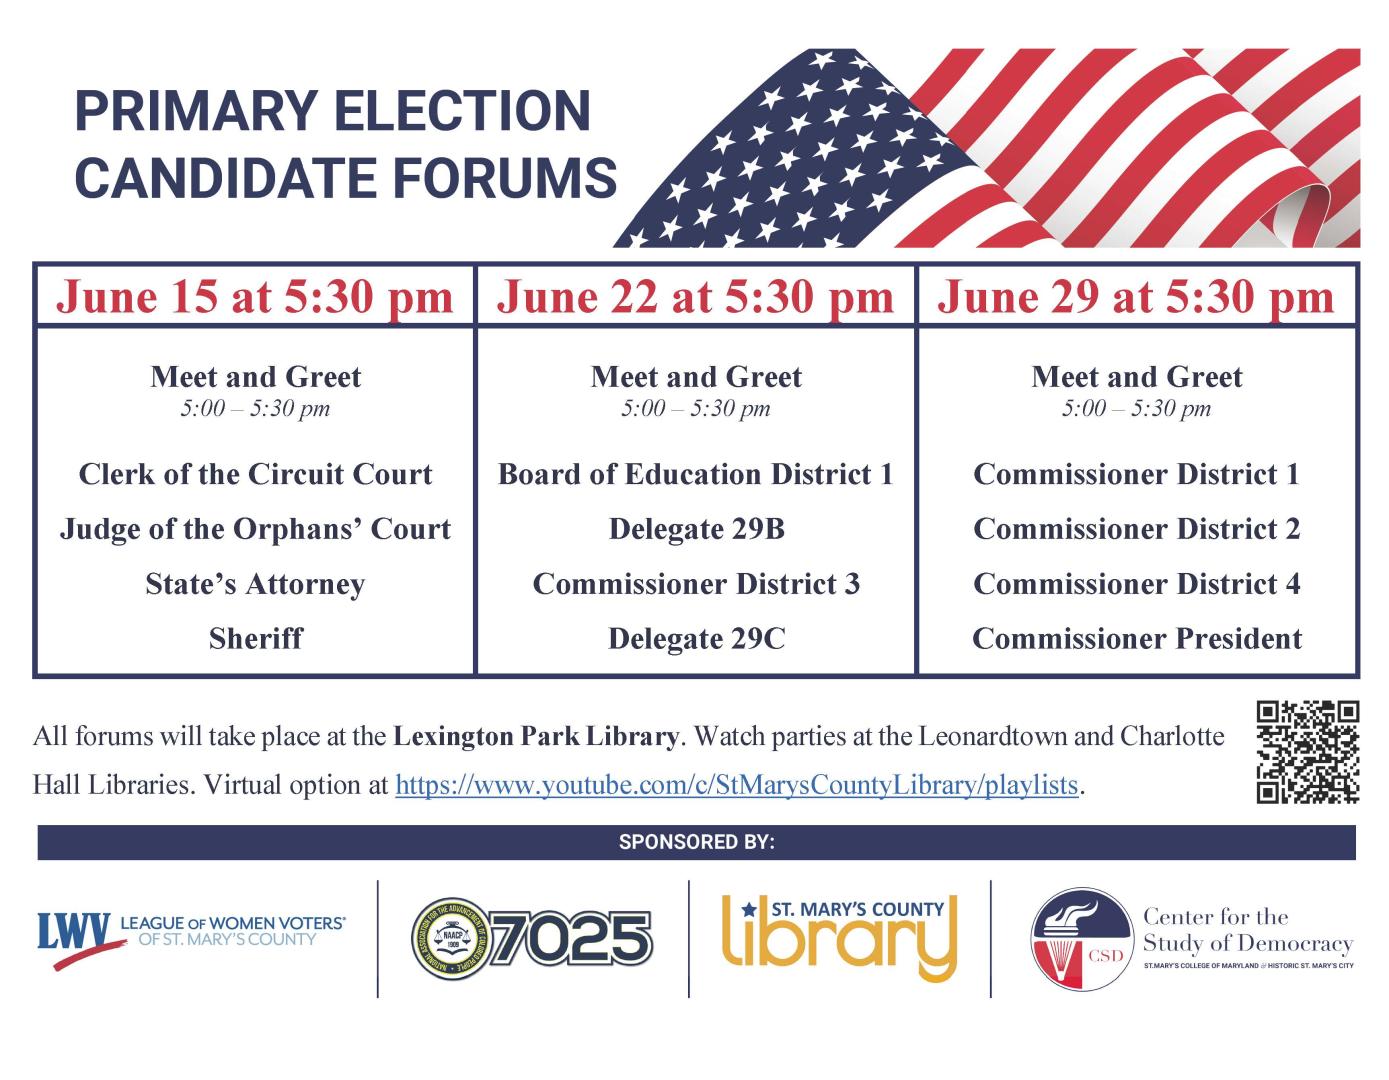 candidate forum flyer with details for each of three events that are fully described in the text of the event.